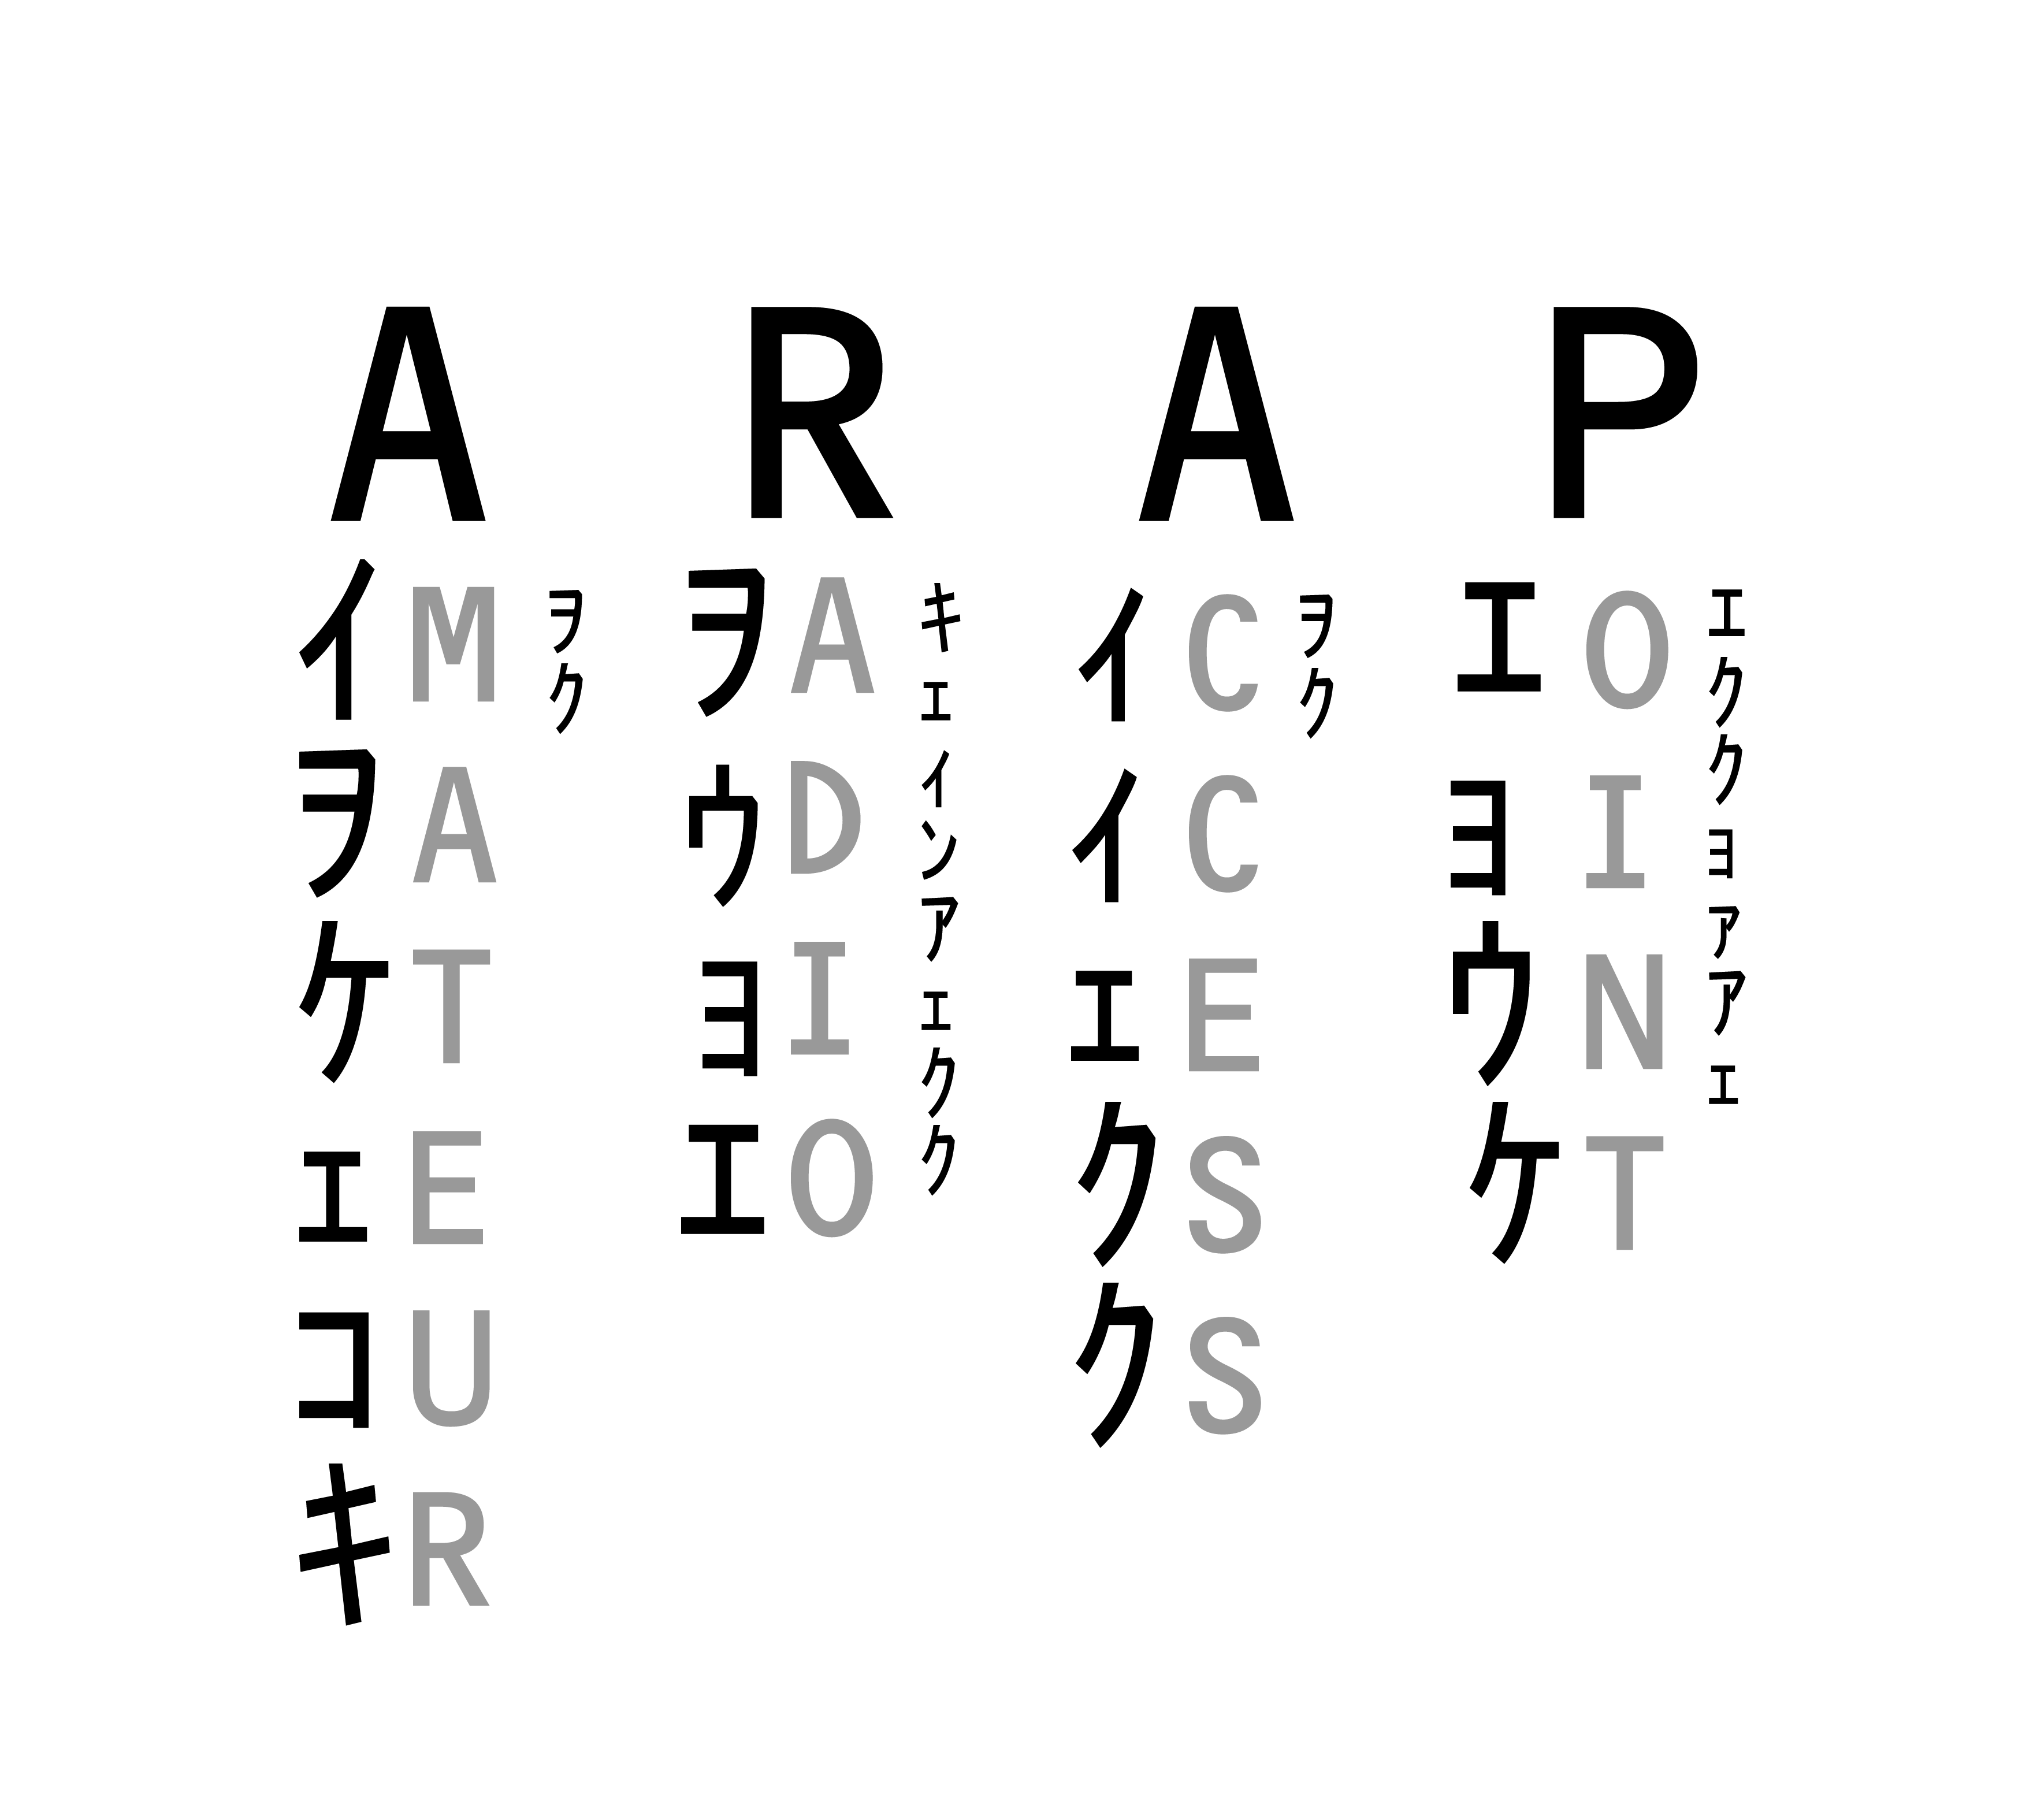 ARAP stands for Amateur Radio Access Point